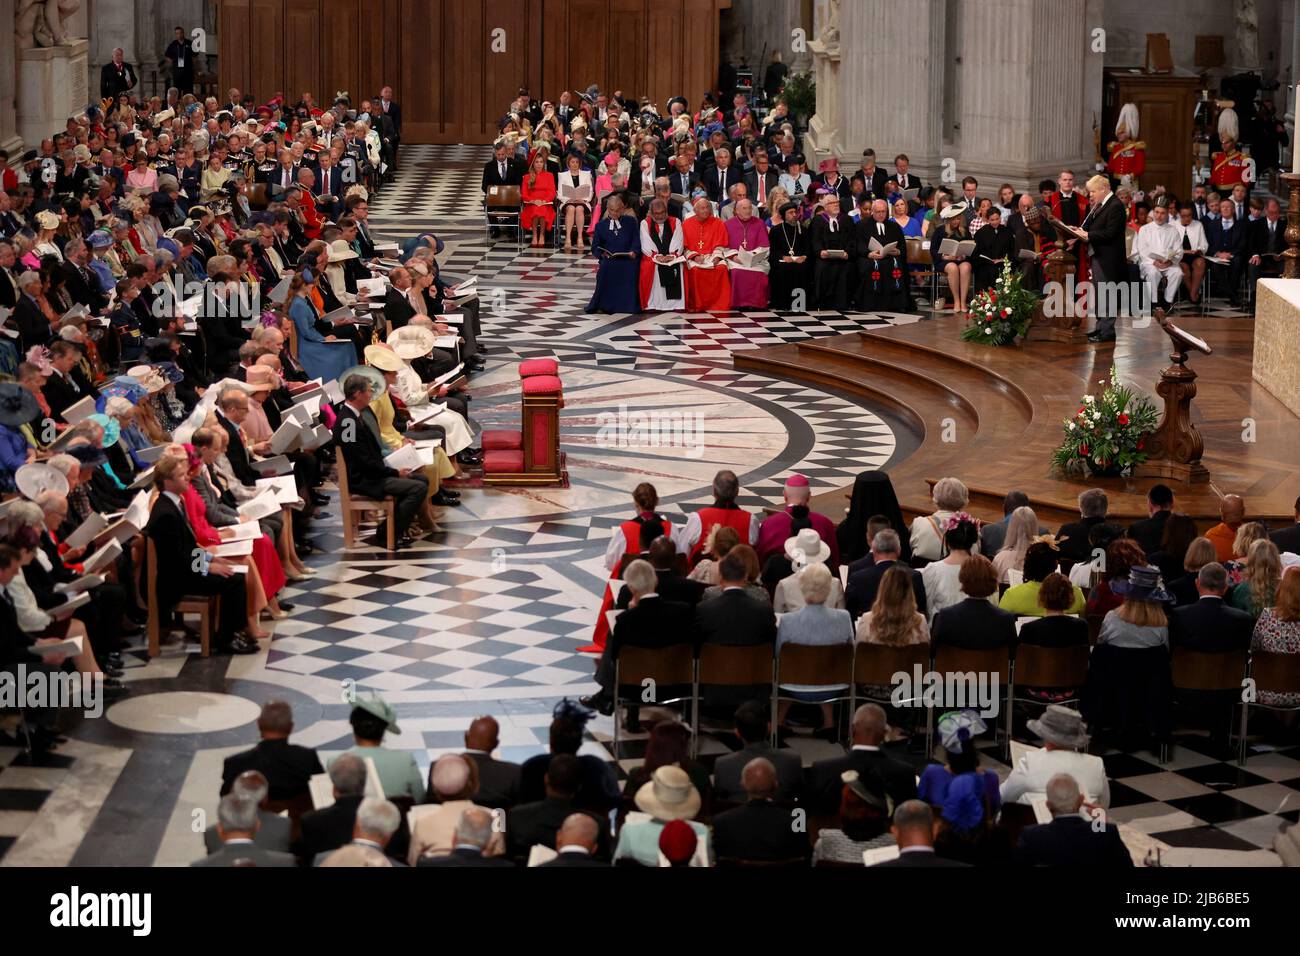 Prime Minister Boris Johnson gives a reading from the New Testament during the National Service of Thanksgiving at St Paul's Cathedral, London, on day two of the Platinum Jubilee celebrations for Queen Elizabeth II. Picture date: Friday June 3, 2022. Stock Photo